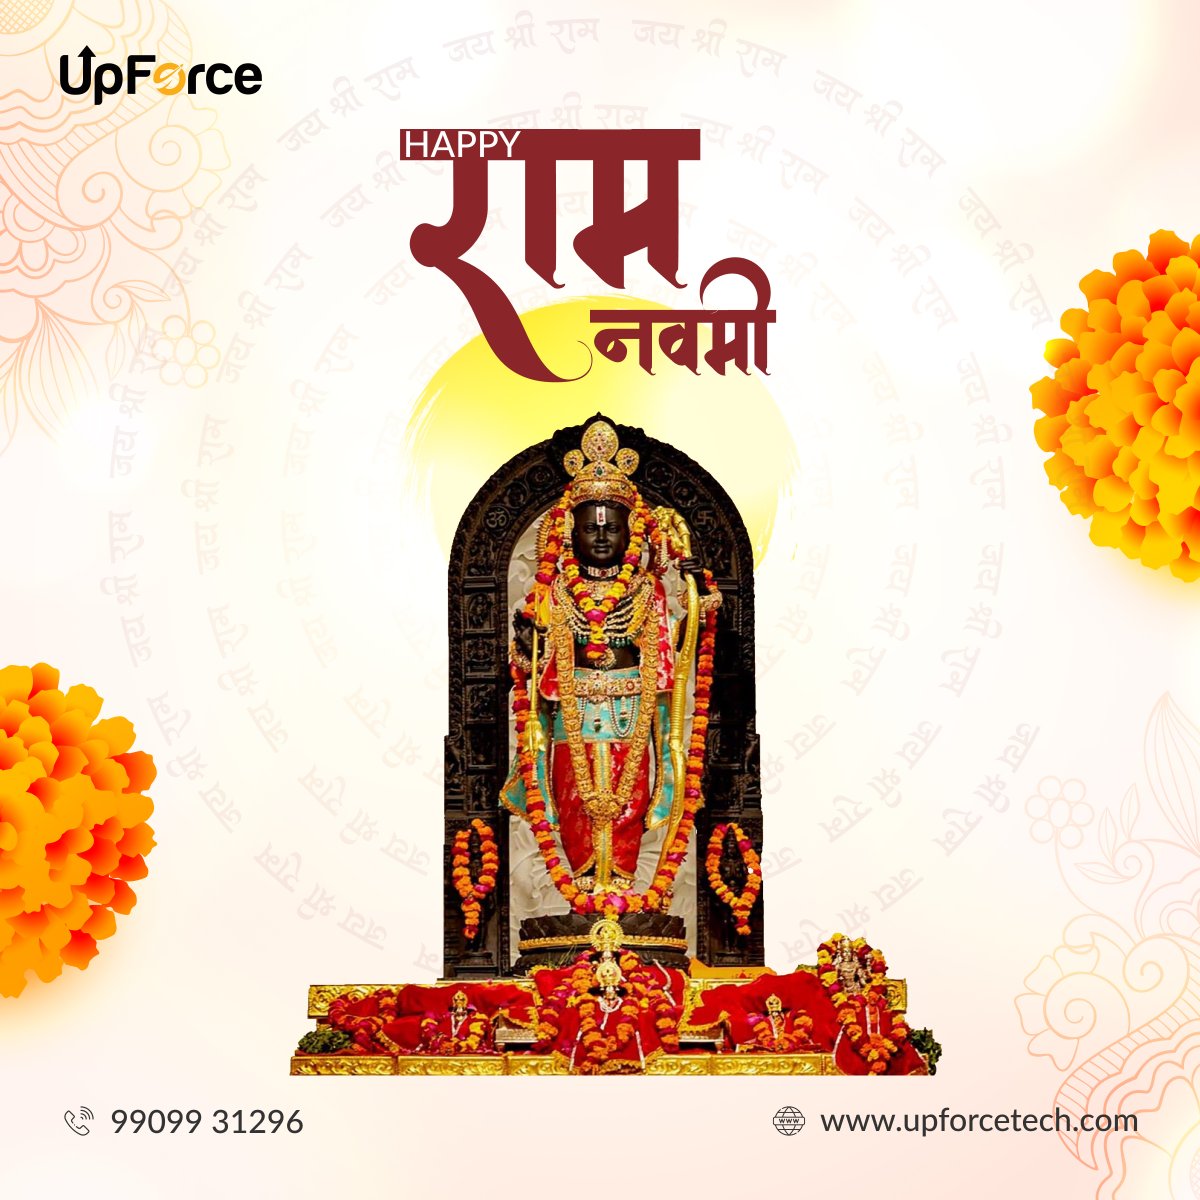 'May this Ram Navami illuminate your life with joy, peace, and prosperity! 🌟 Wishing everyone a blessed Ram Navami from all of us at UpforceTech. Let the divine blessings of Lord Rama fill your hearts and homes with happiness. #RamNavami #UpforceTech #Blessings'